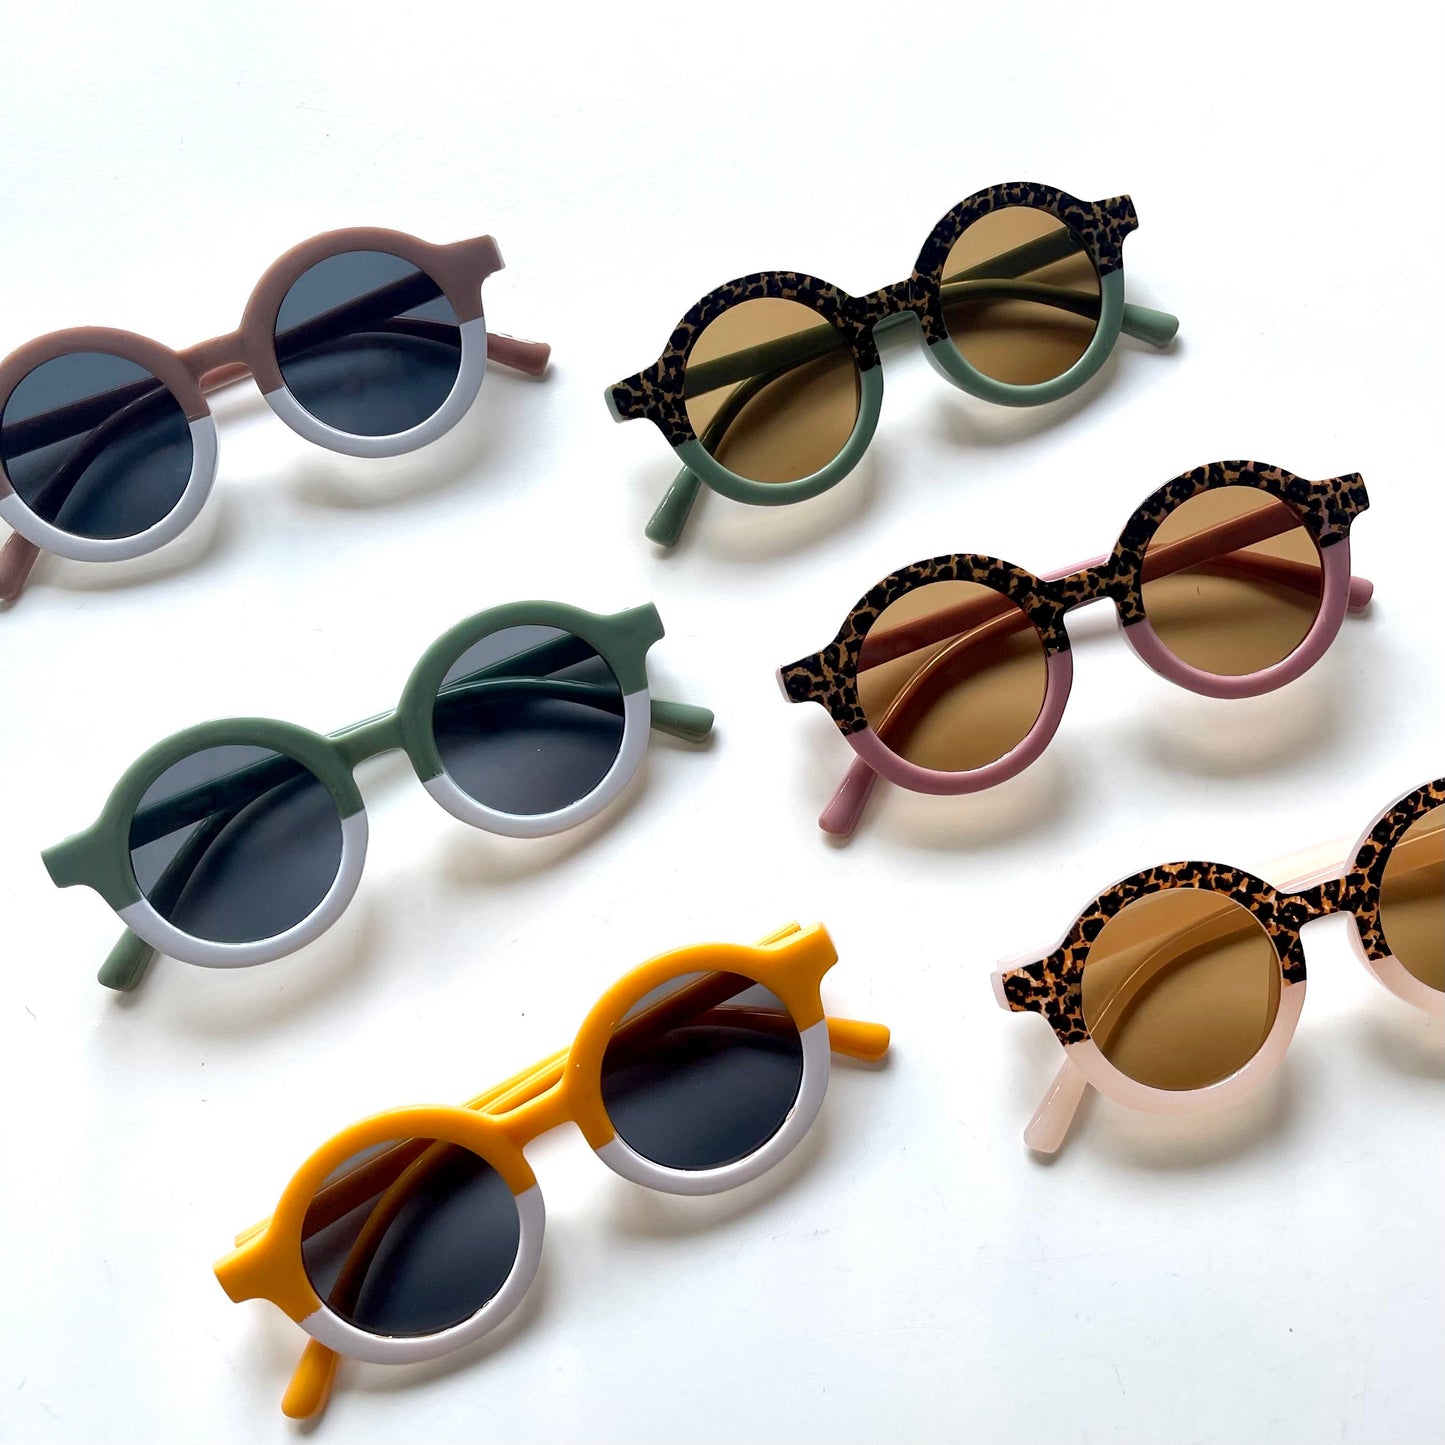 The Two-Toned Retro Sunnies